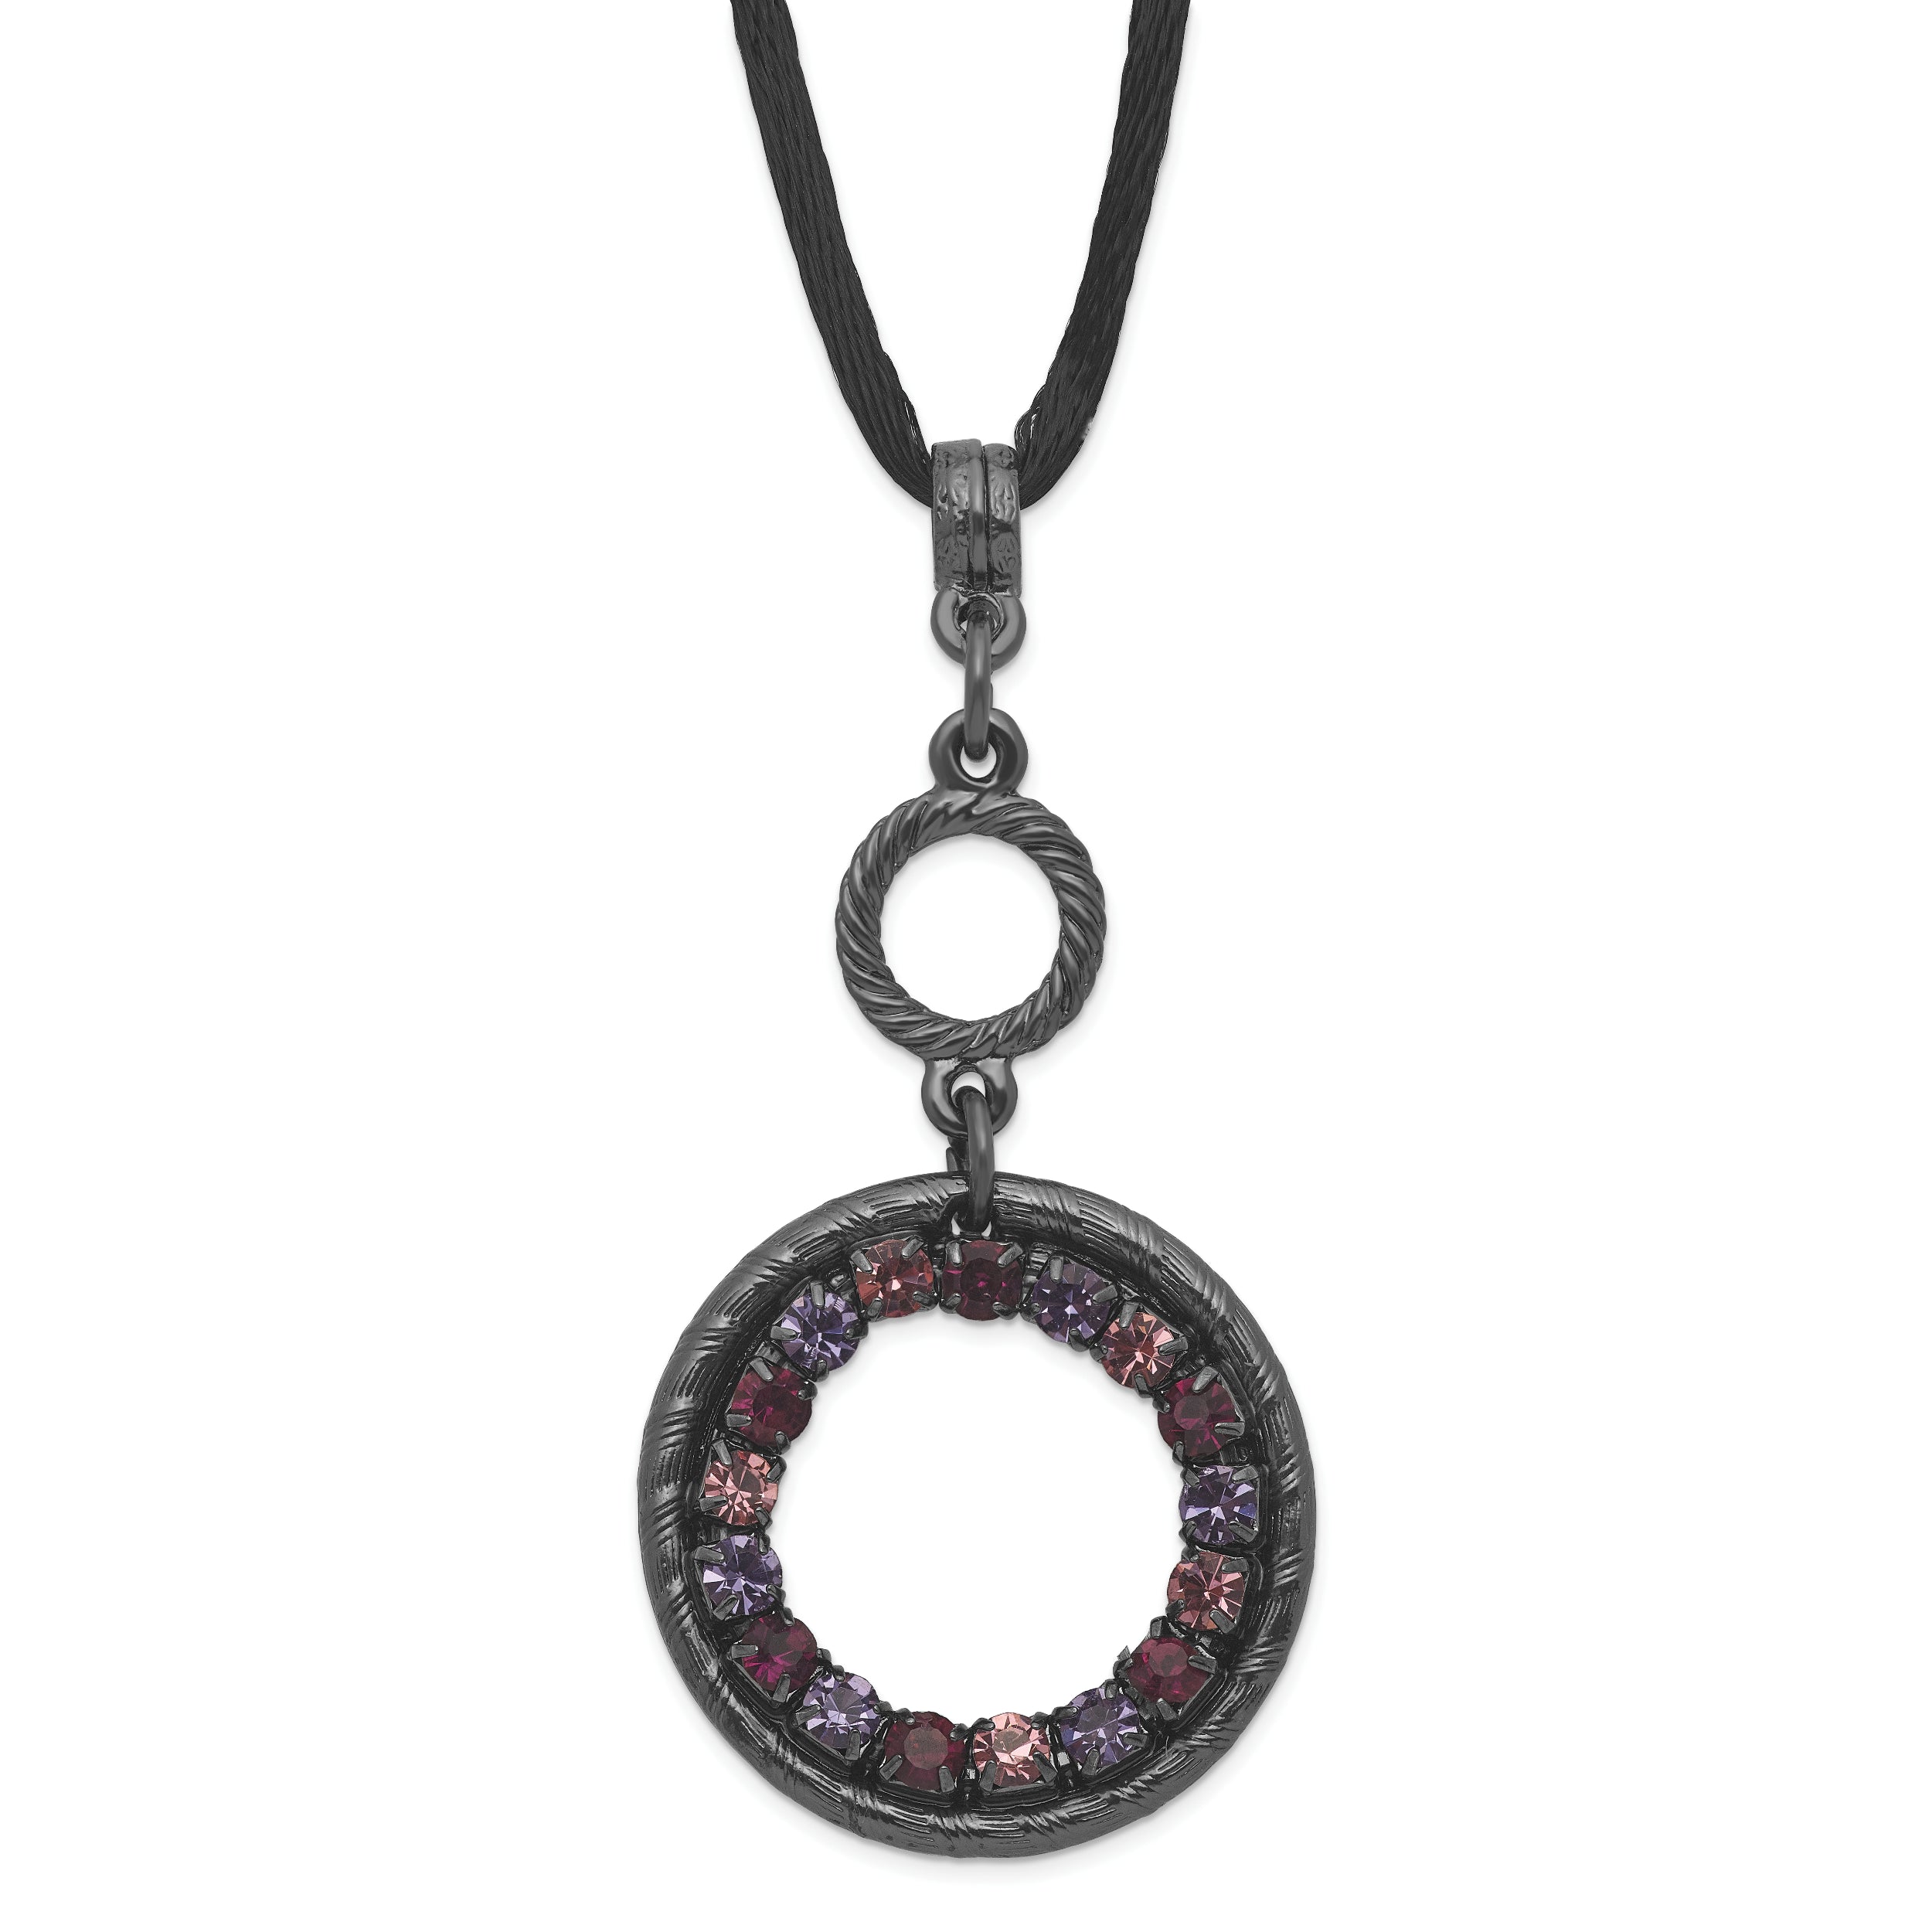 1928 Jewelry Black-plated Light and Dark Pink and Purple Crystal Double Circle Adjustable 16 inch Satin Cord Necklace with 3 inch extension